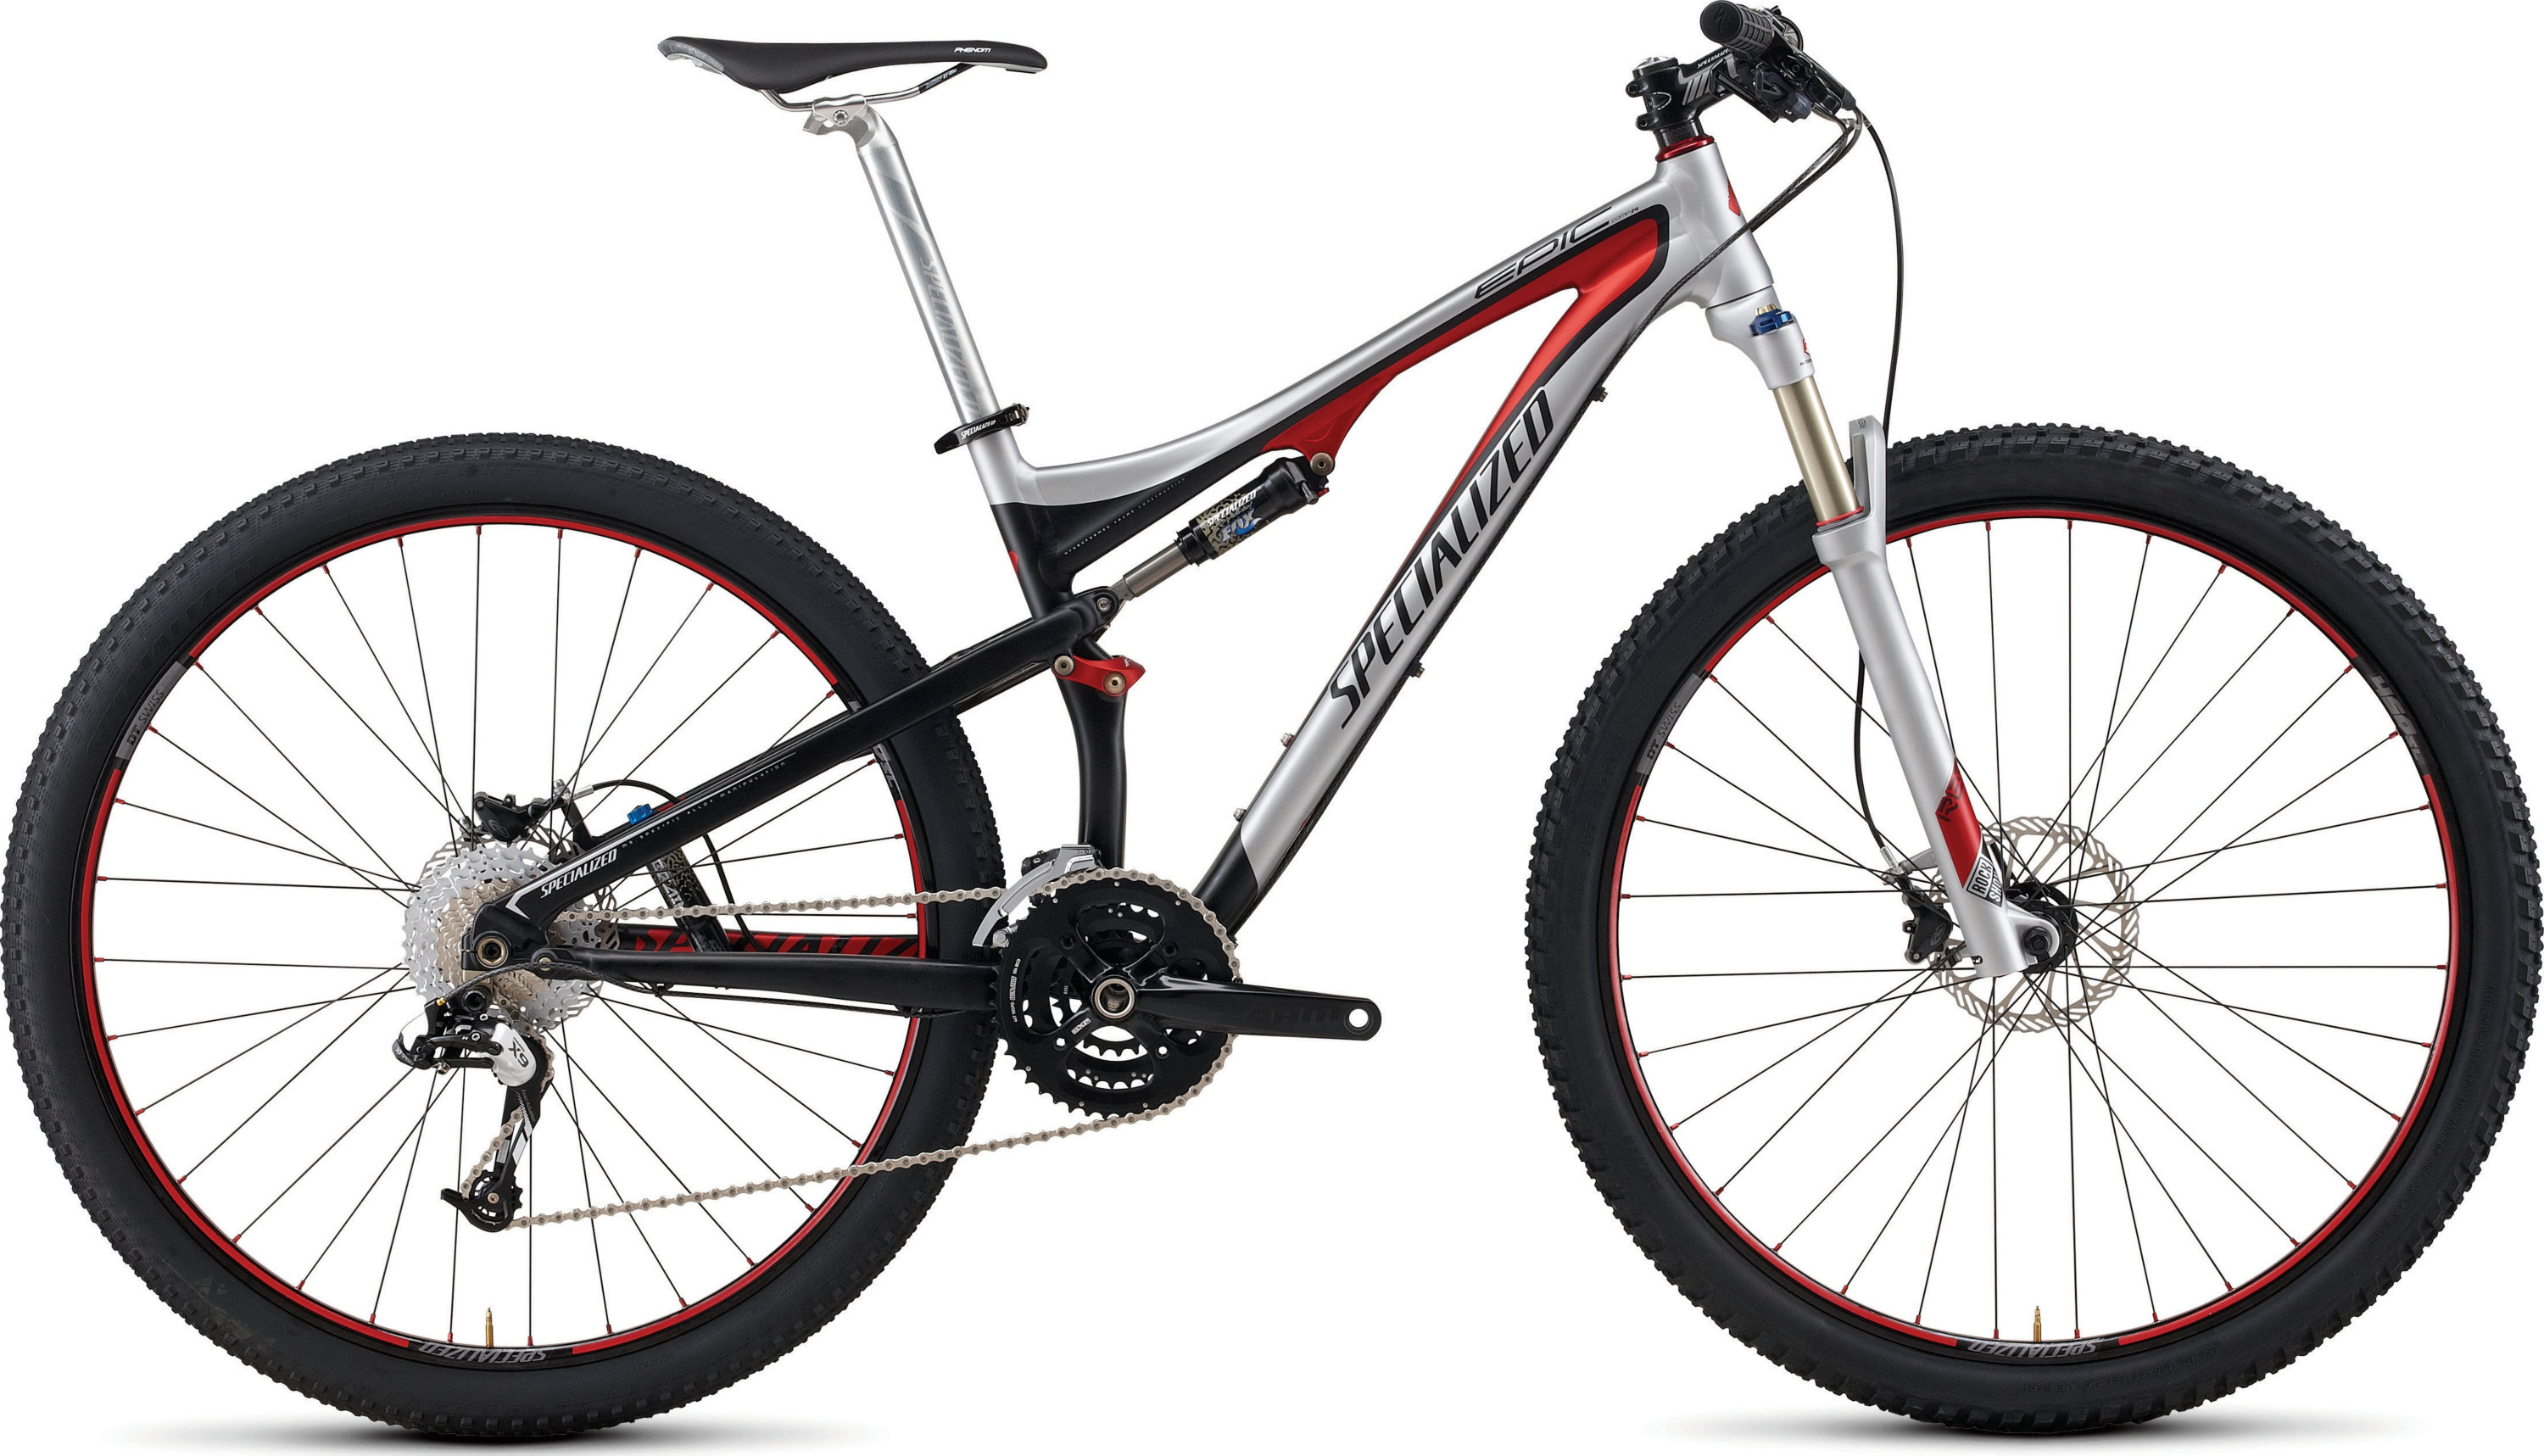 specialized epic 2009